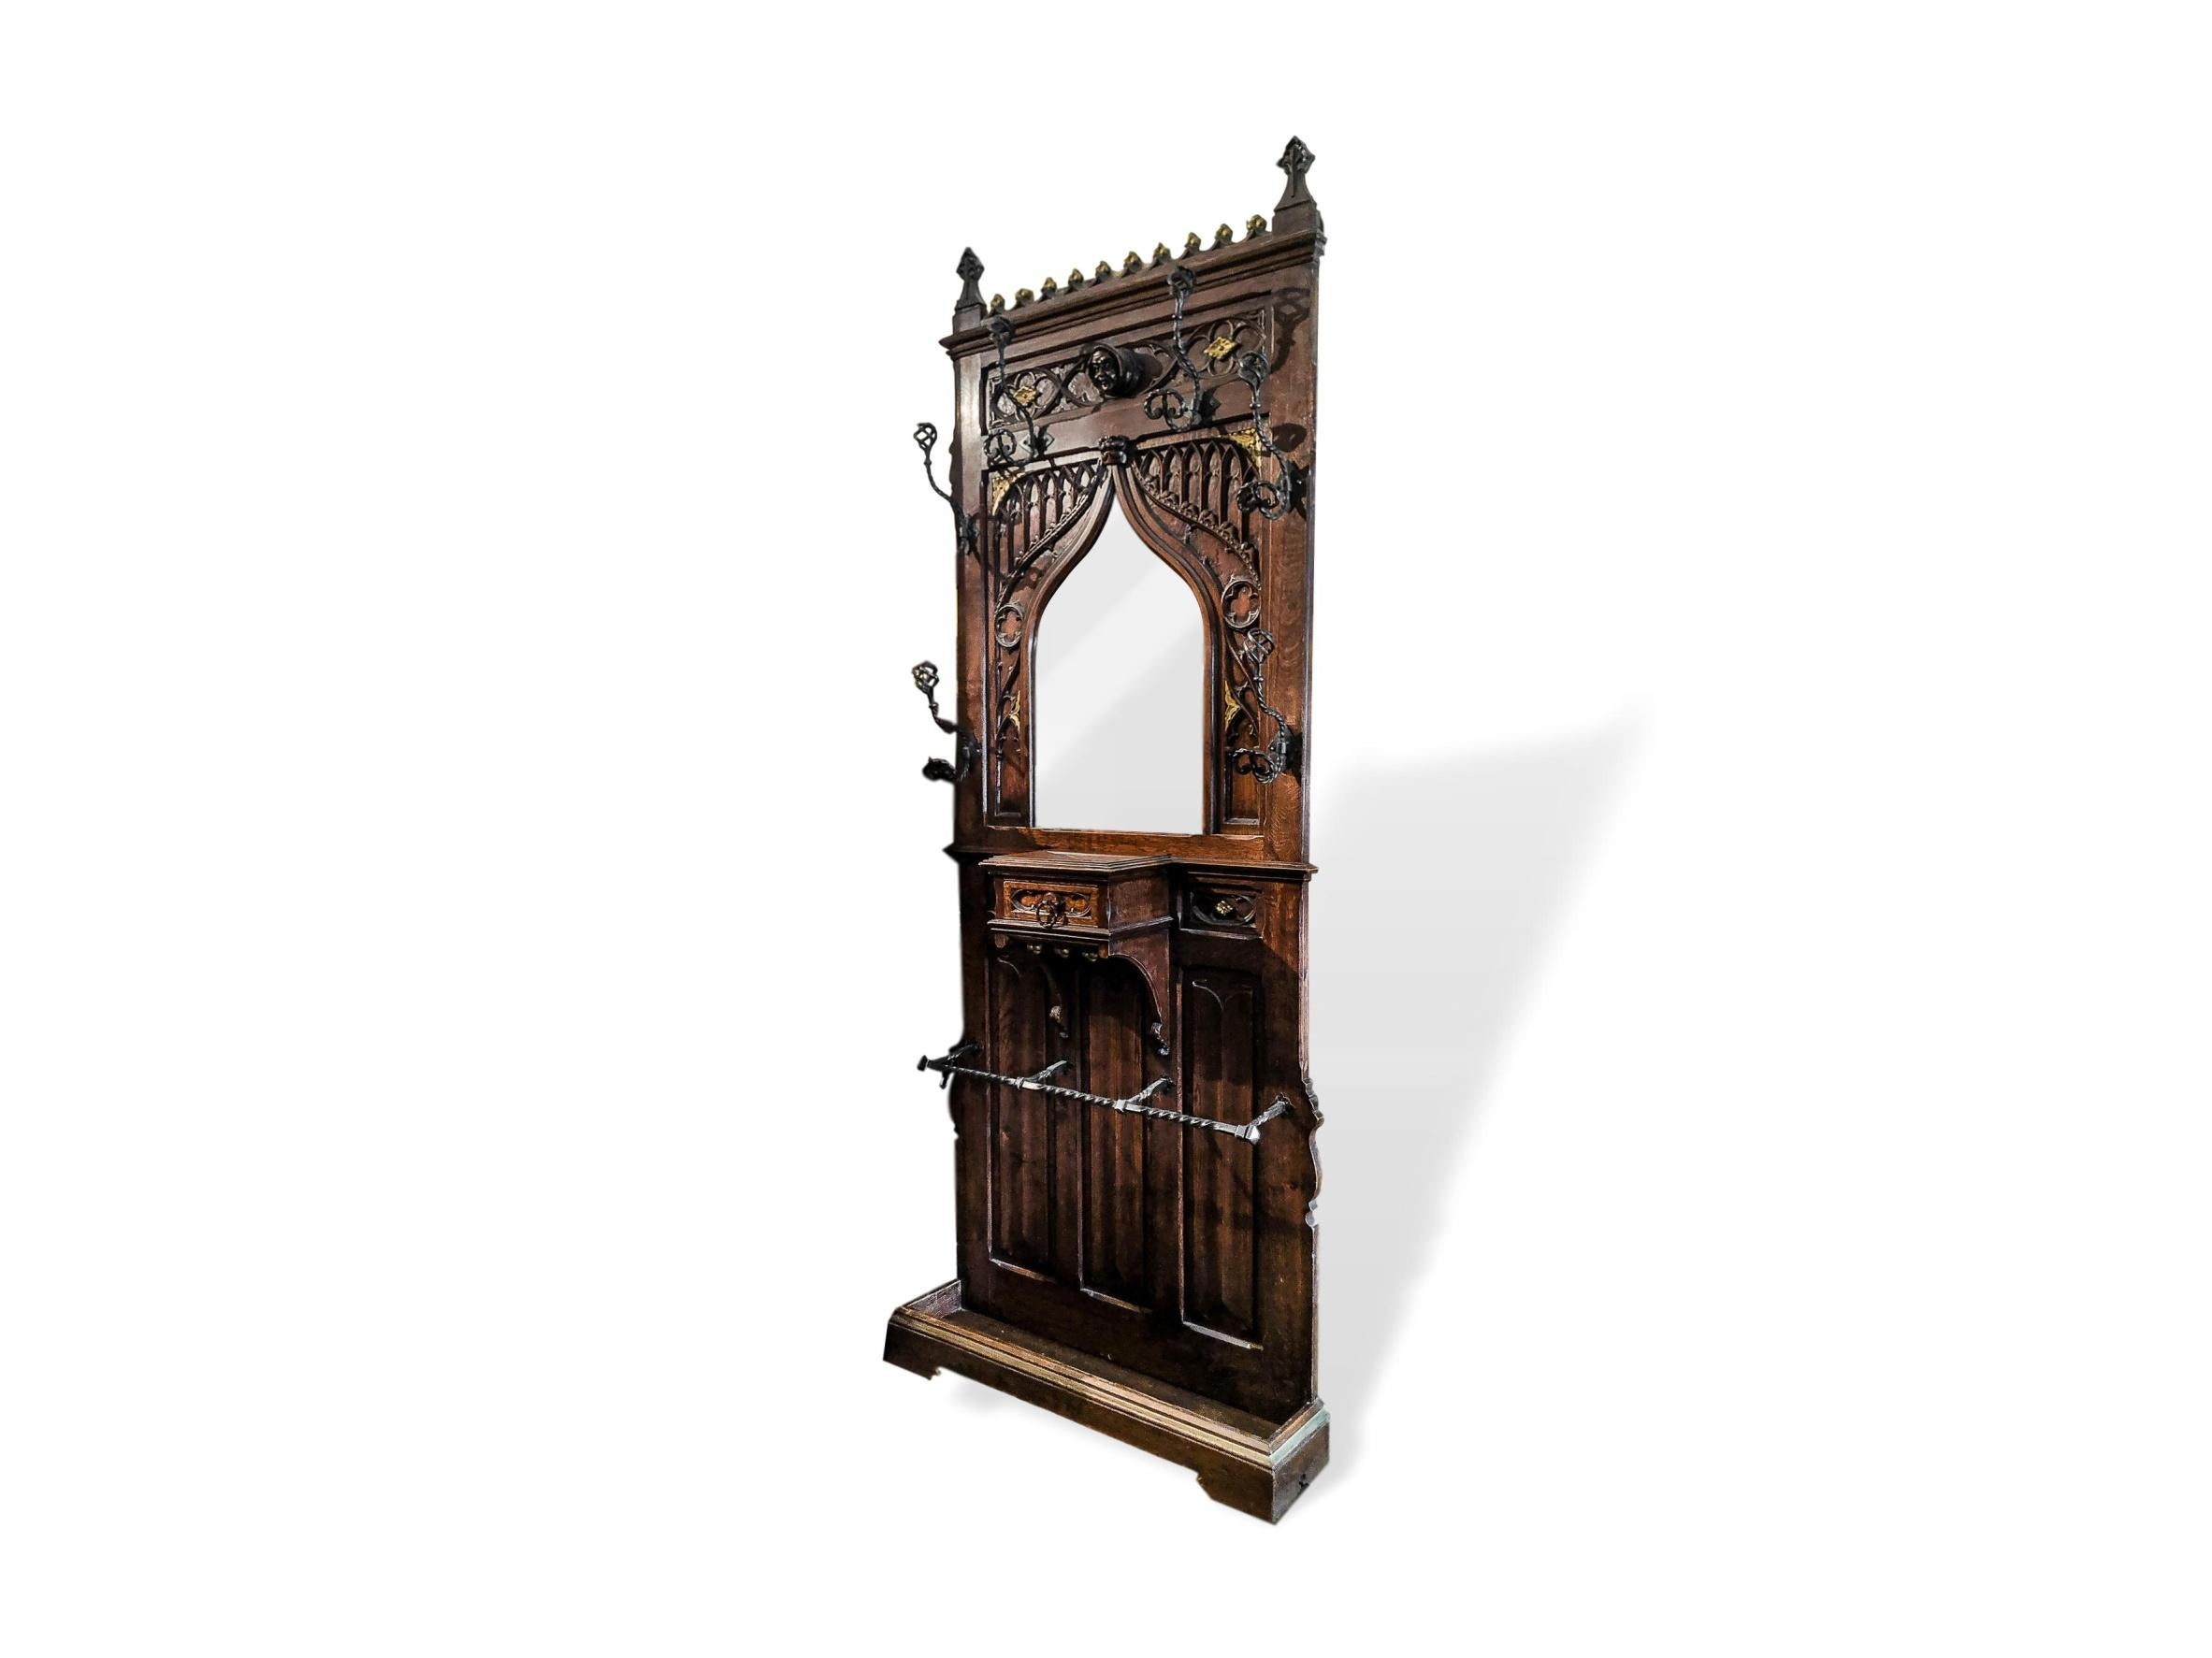 Gothic Revival coat rack hall tree umbrella stand hand carved mirror, French, circa 1880, with glove drawer below the beveled mirror, with blind Gothic tracery, and richly gilded highlights, with three beautifully hand carved linen fold panels on a